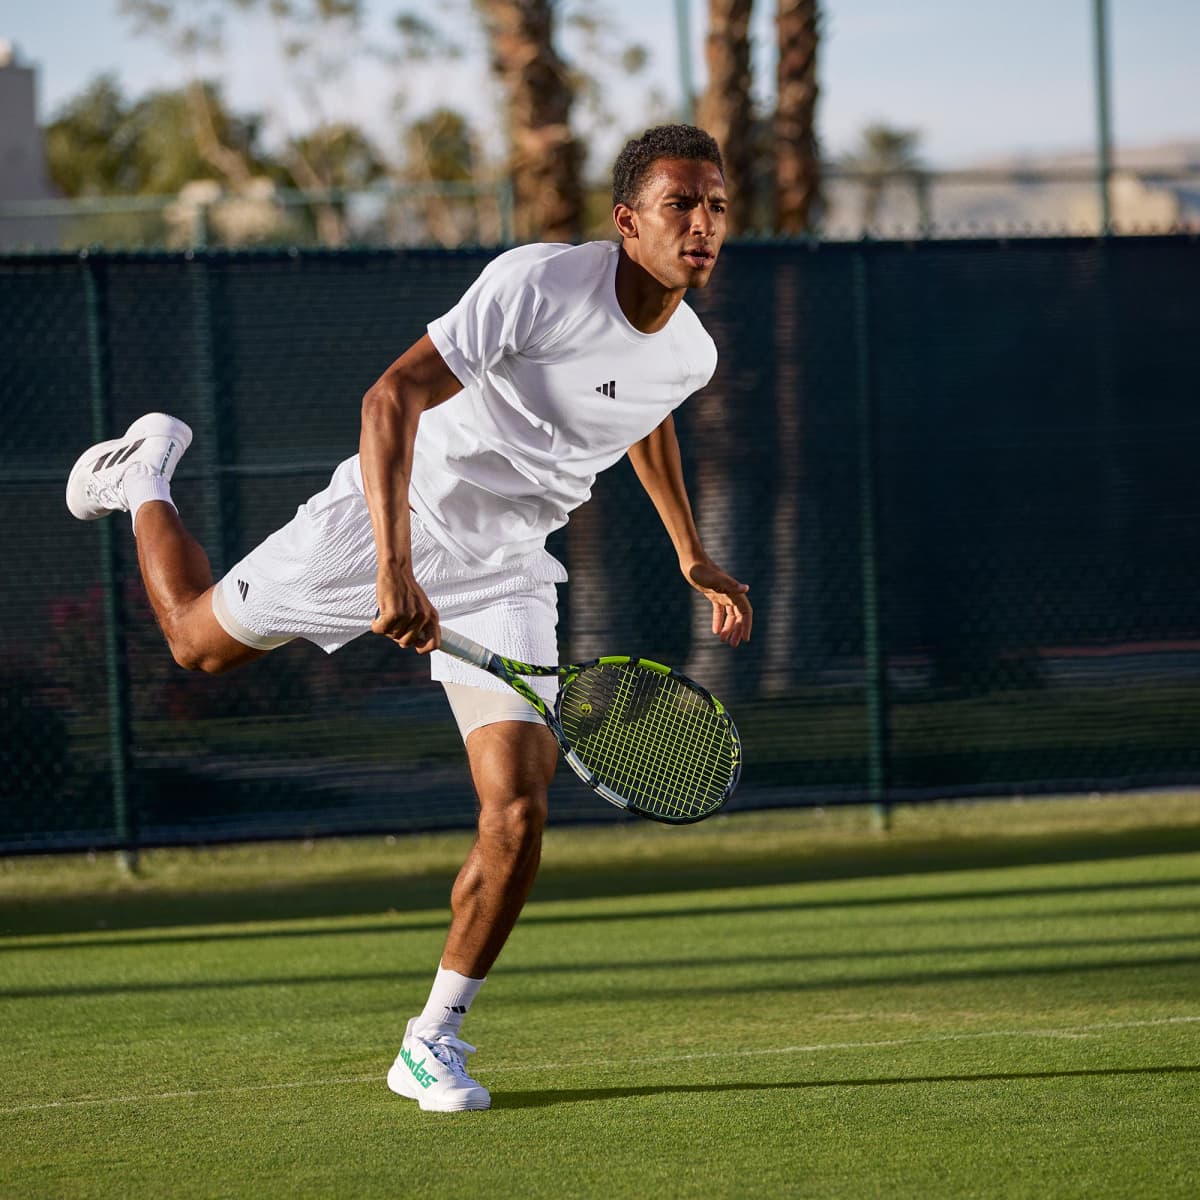 Adidas takes a unique approach to its 2023 Wimbledon tennis shorts